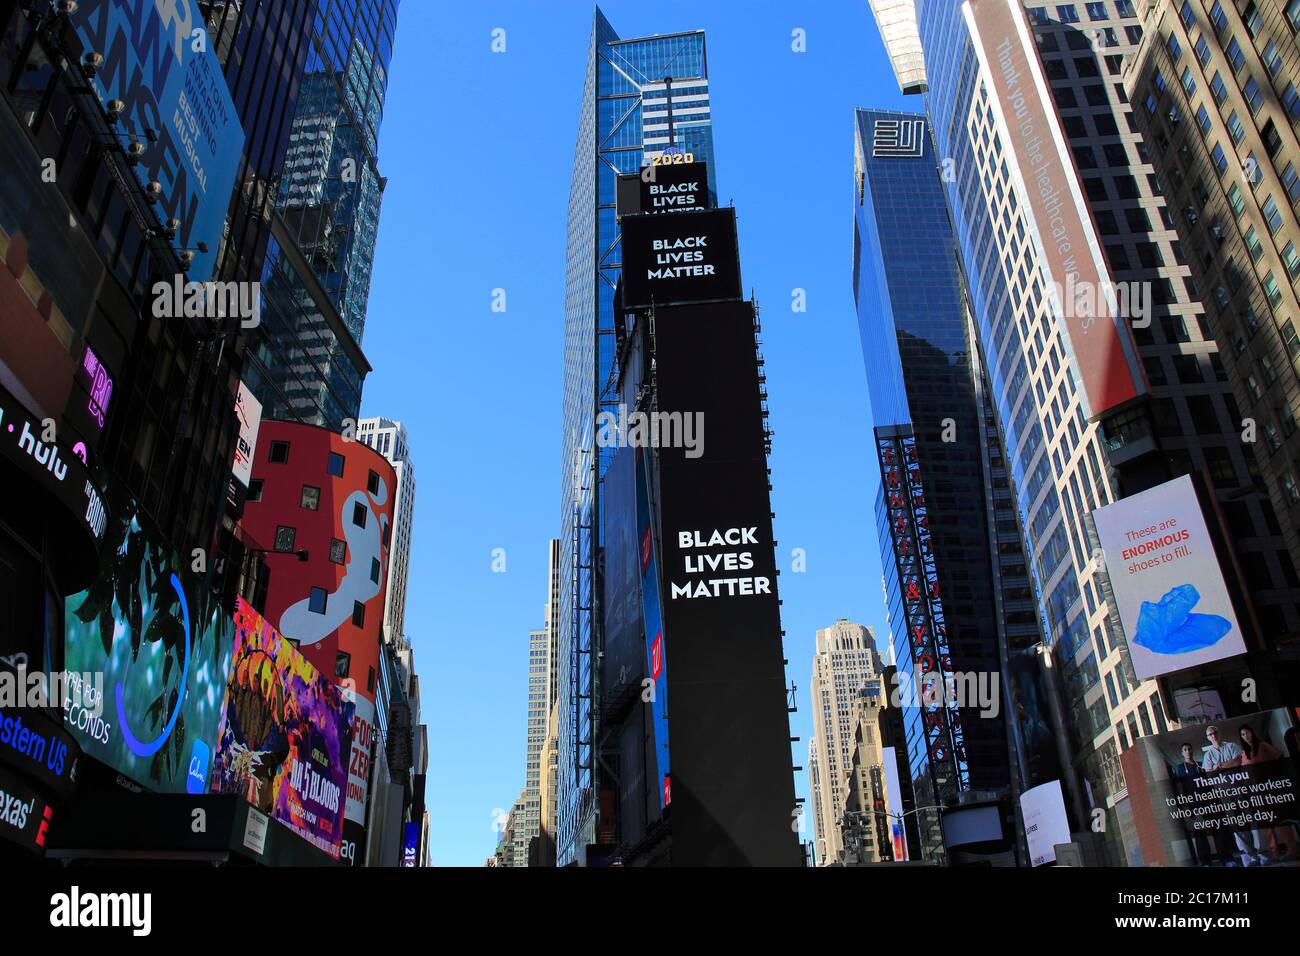 Black Lives Matter Billboard In Times Square The Murder Of George Floyd While In The Custody Of Minneapolis Police Has Prompted Nationwide Protests Around The United States Demanding Justice And Change 1